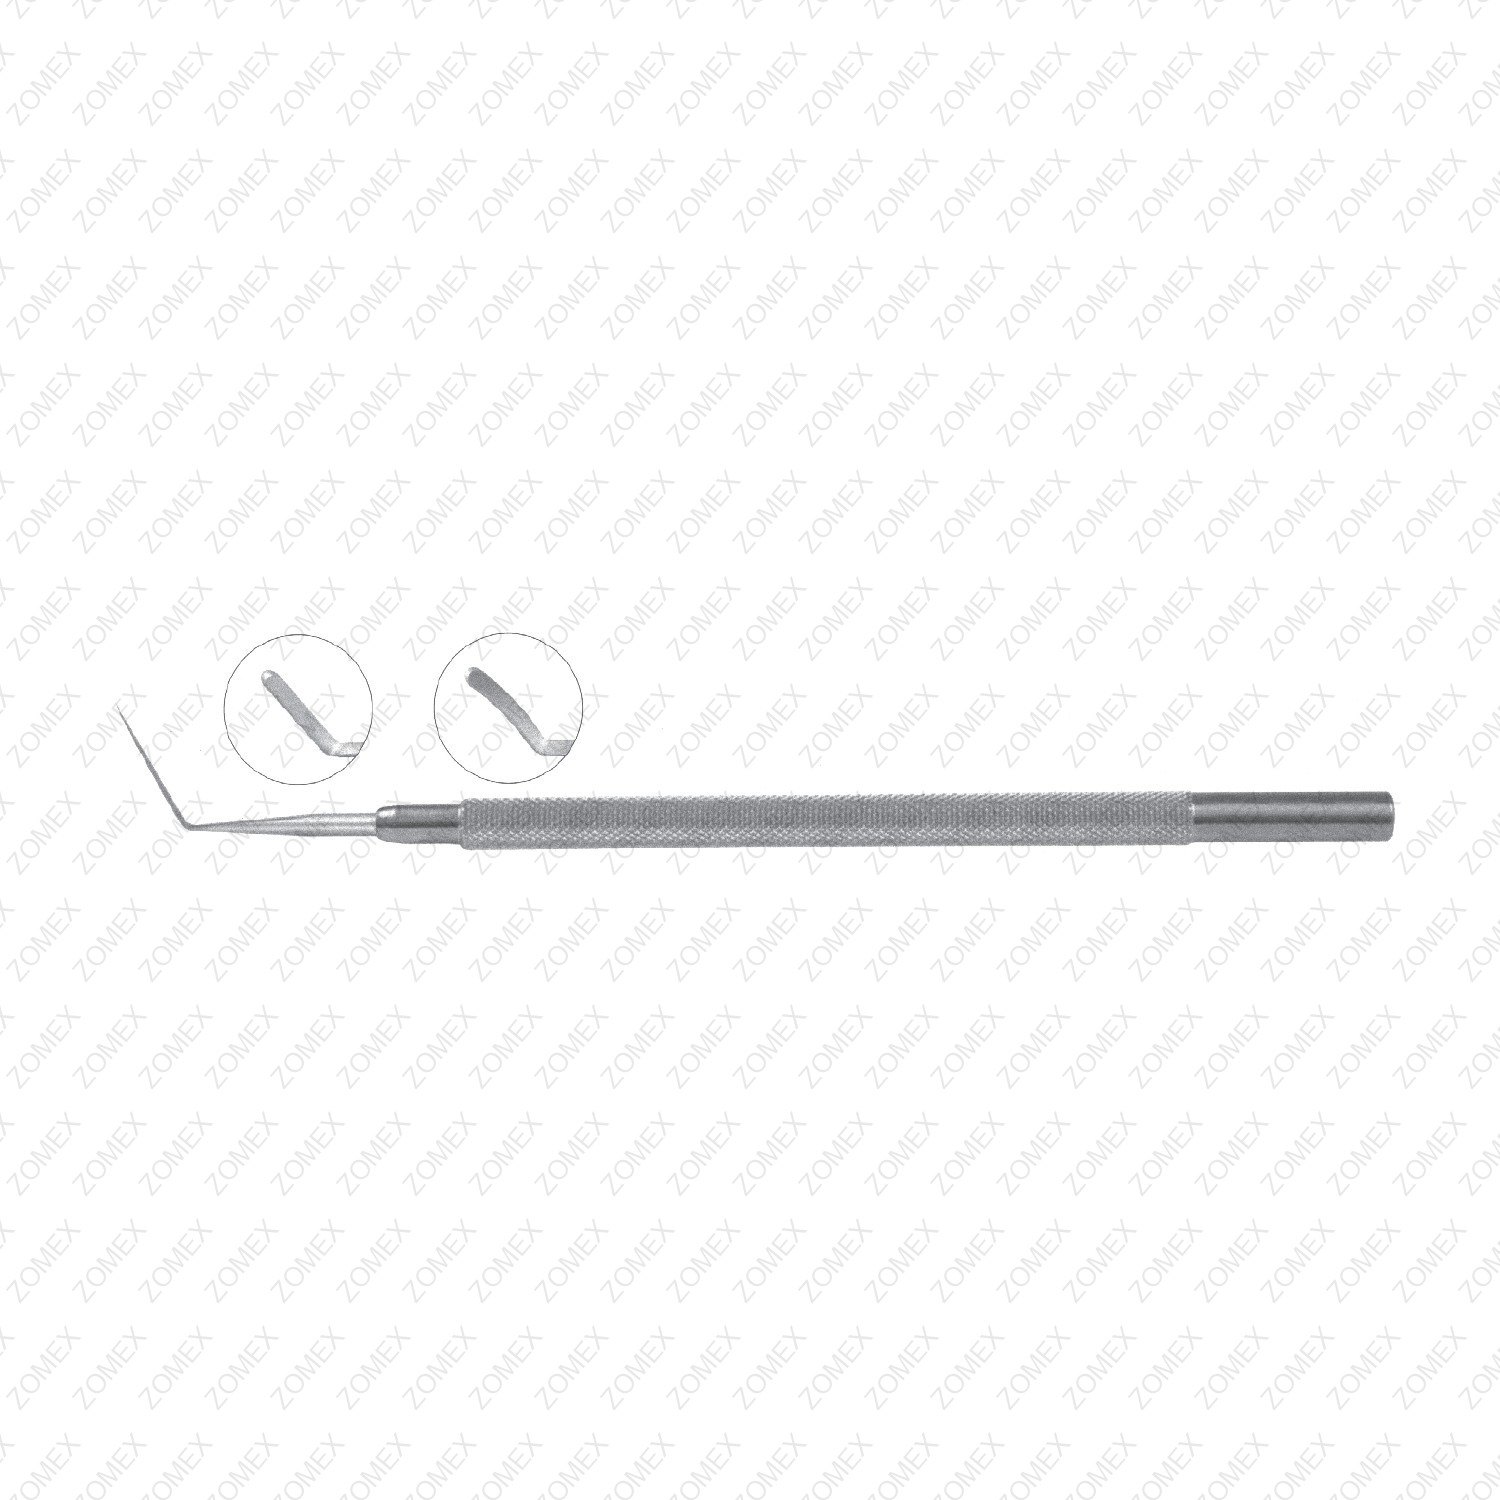 Corneal Dissector - ZOMEX INSTRUMENTS CO